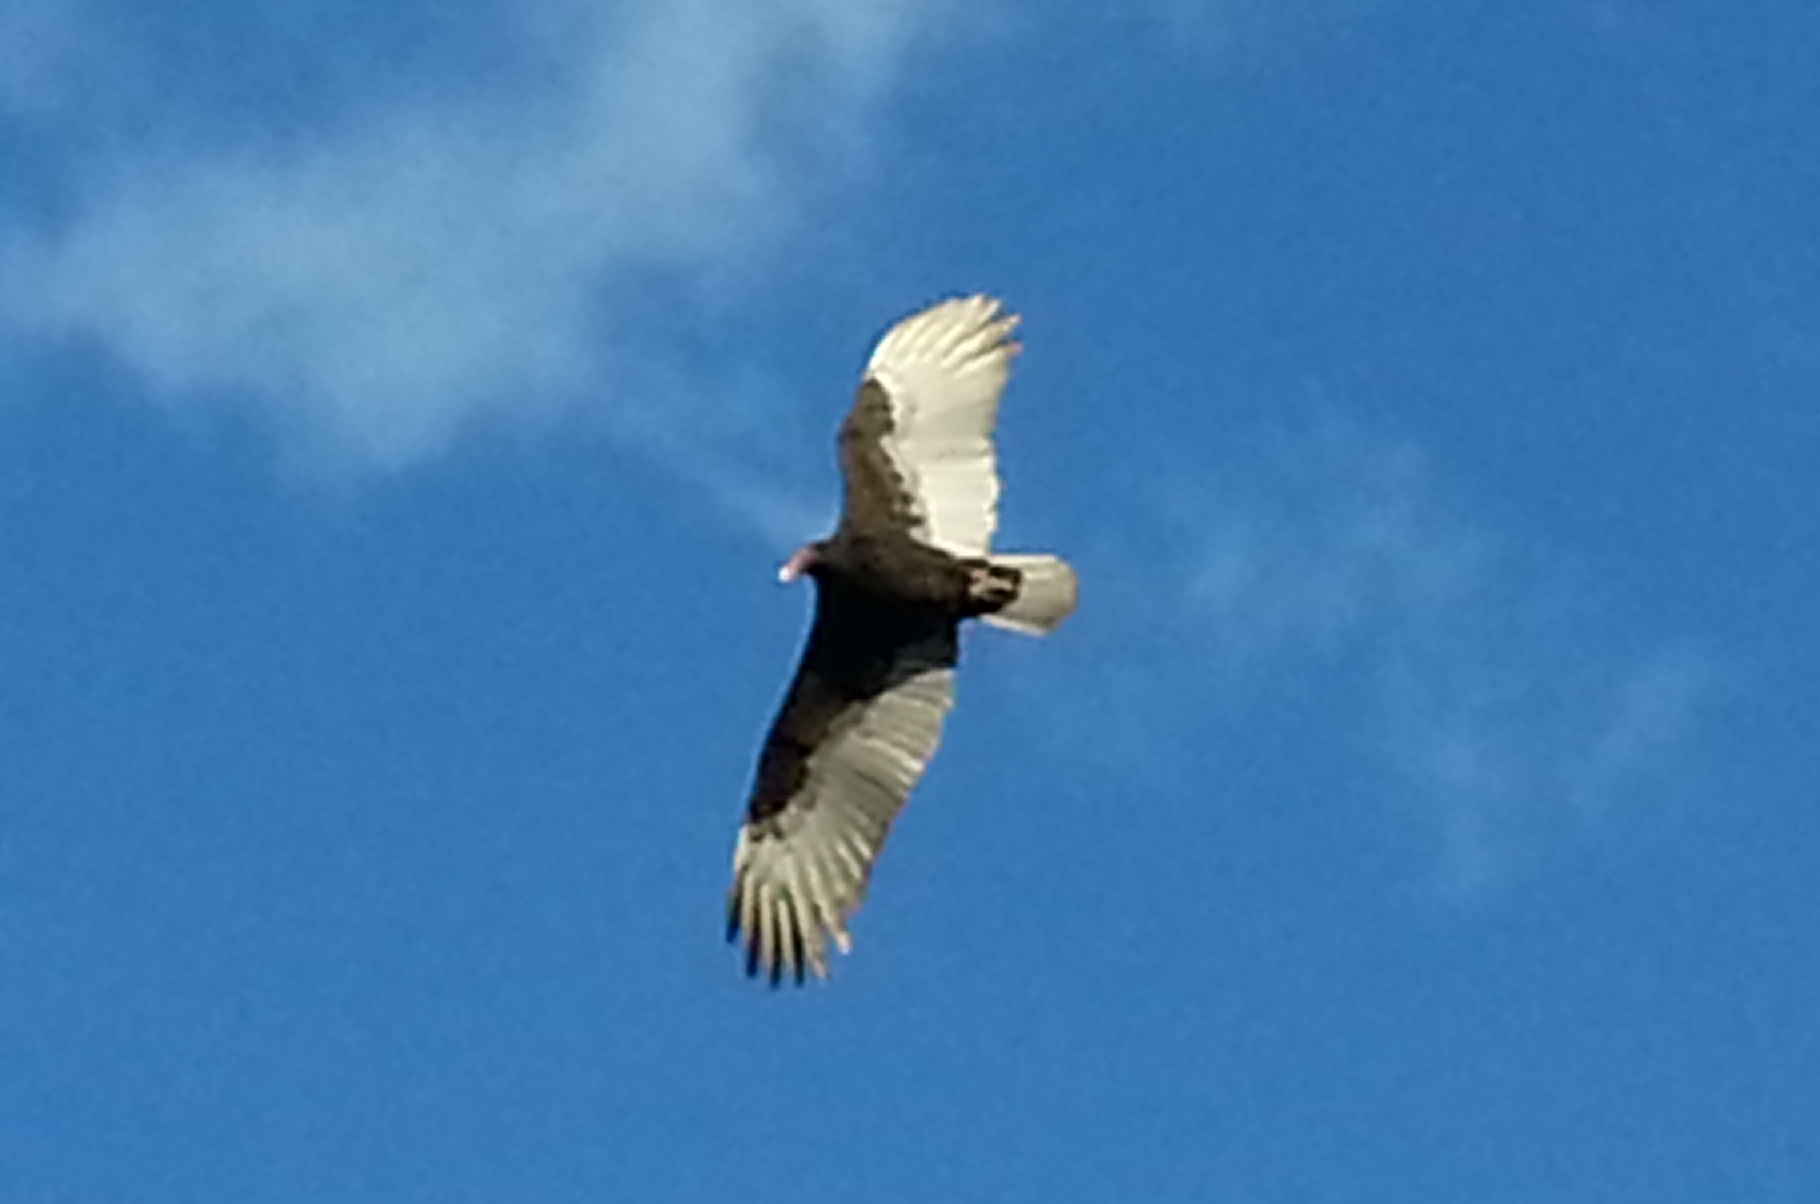 Turkey vulture.  Very close by.